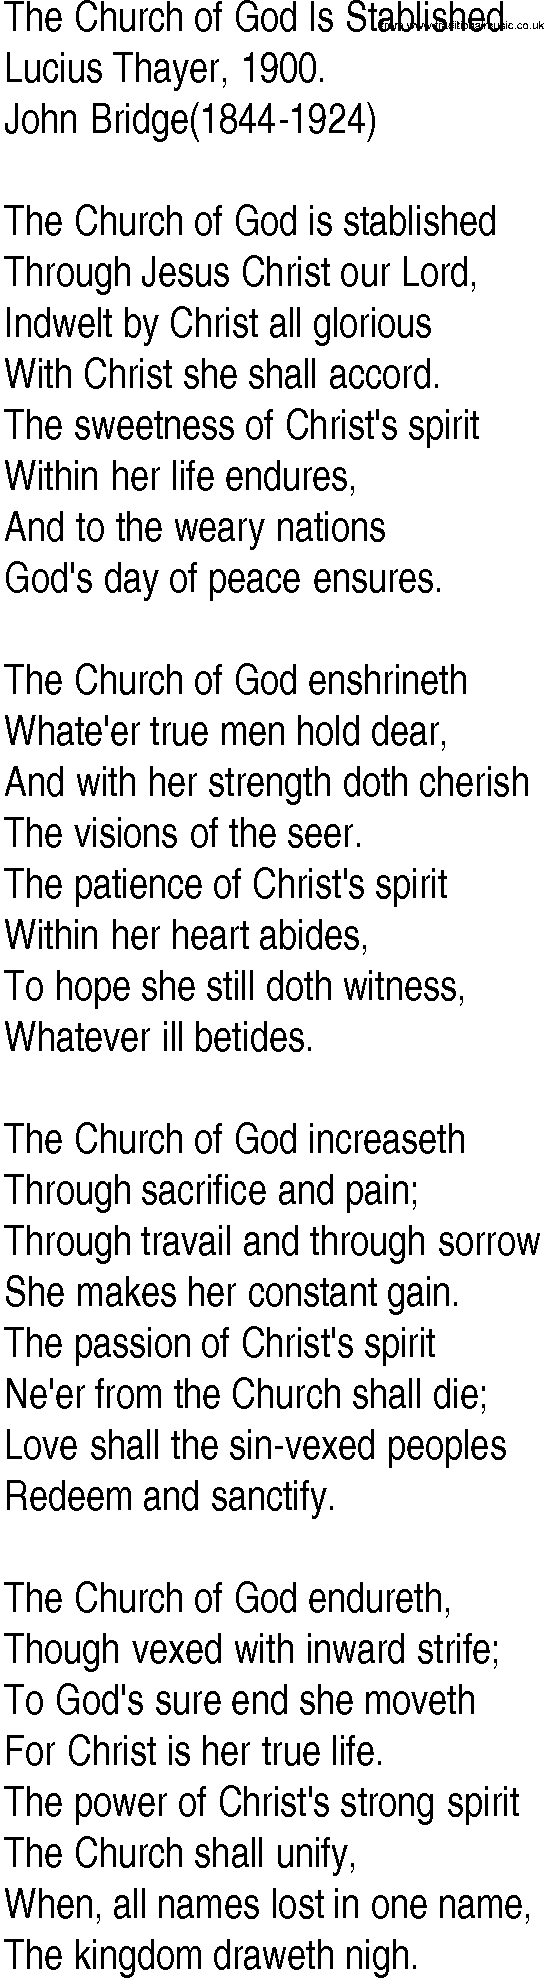 Hymn and Gospel Song: The Church of God Is Stablished by Lucius Thayer lyrics